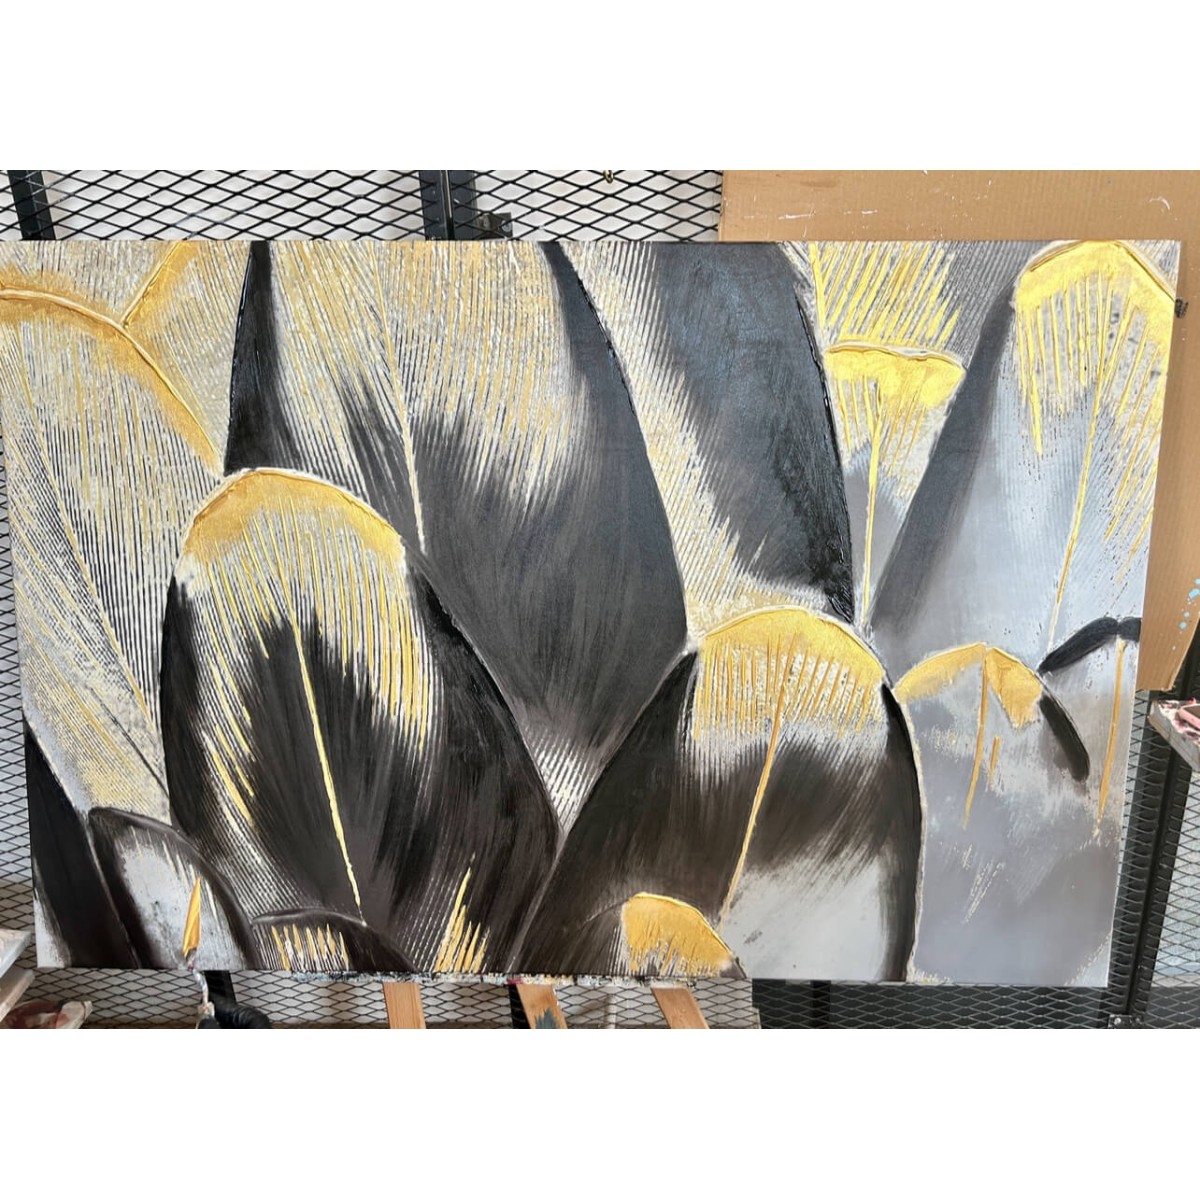 Gold Feather Textured Partial Oil Painting